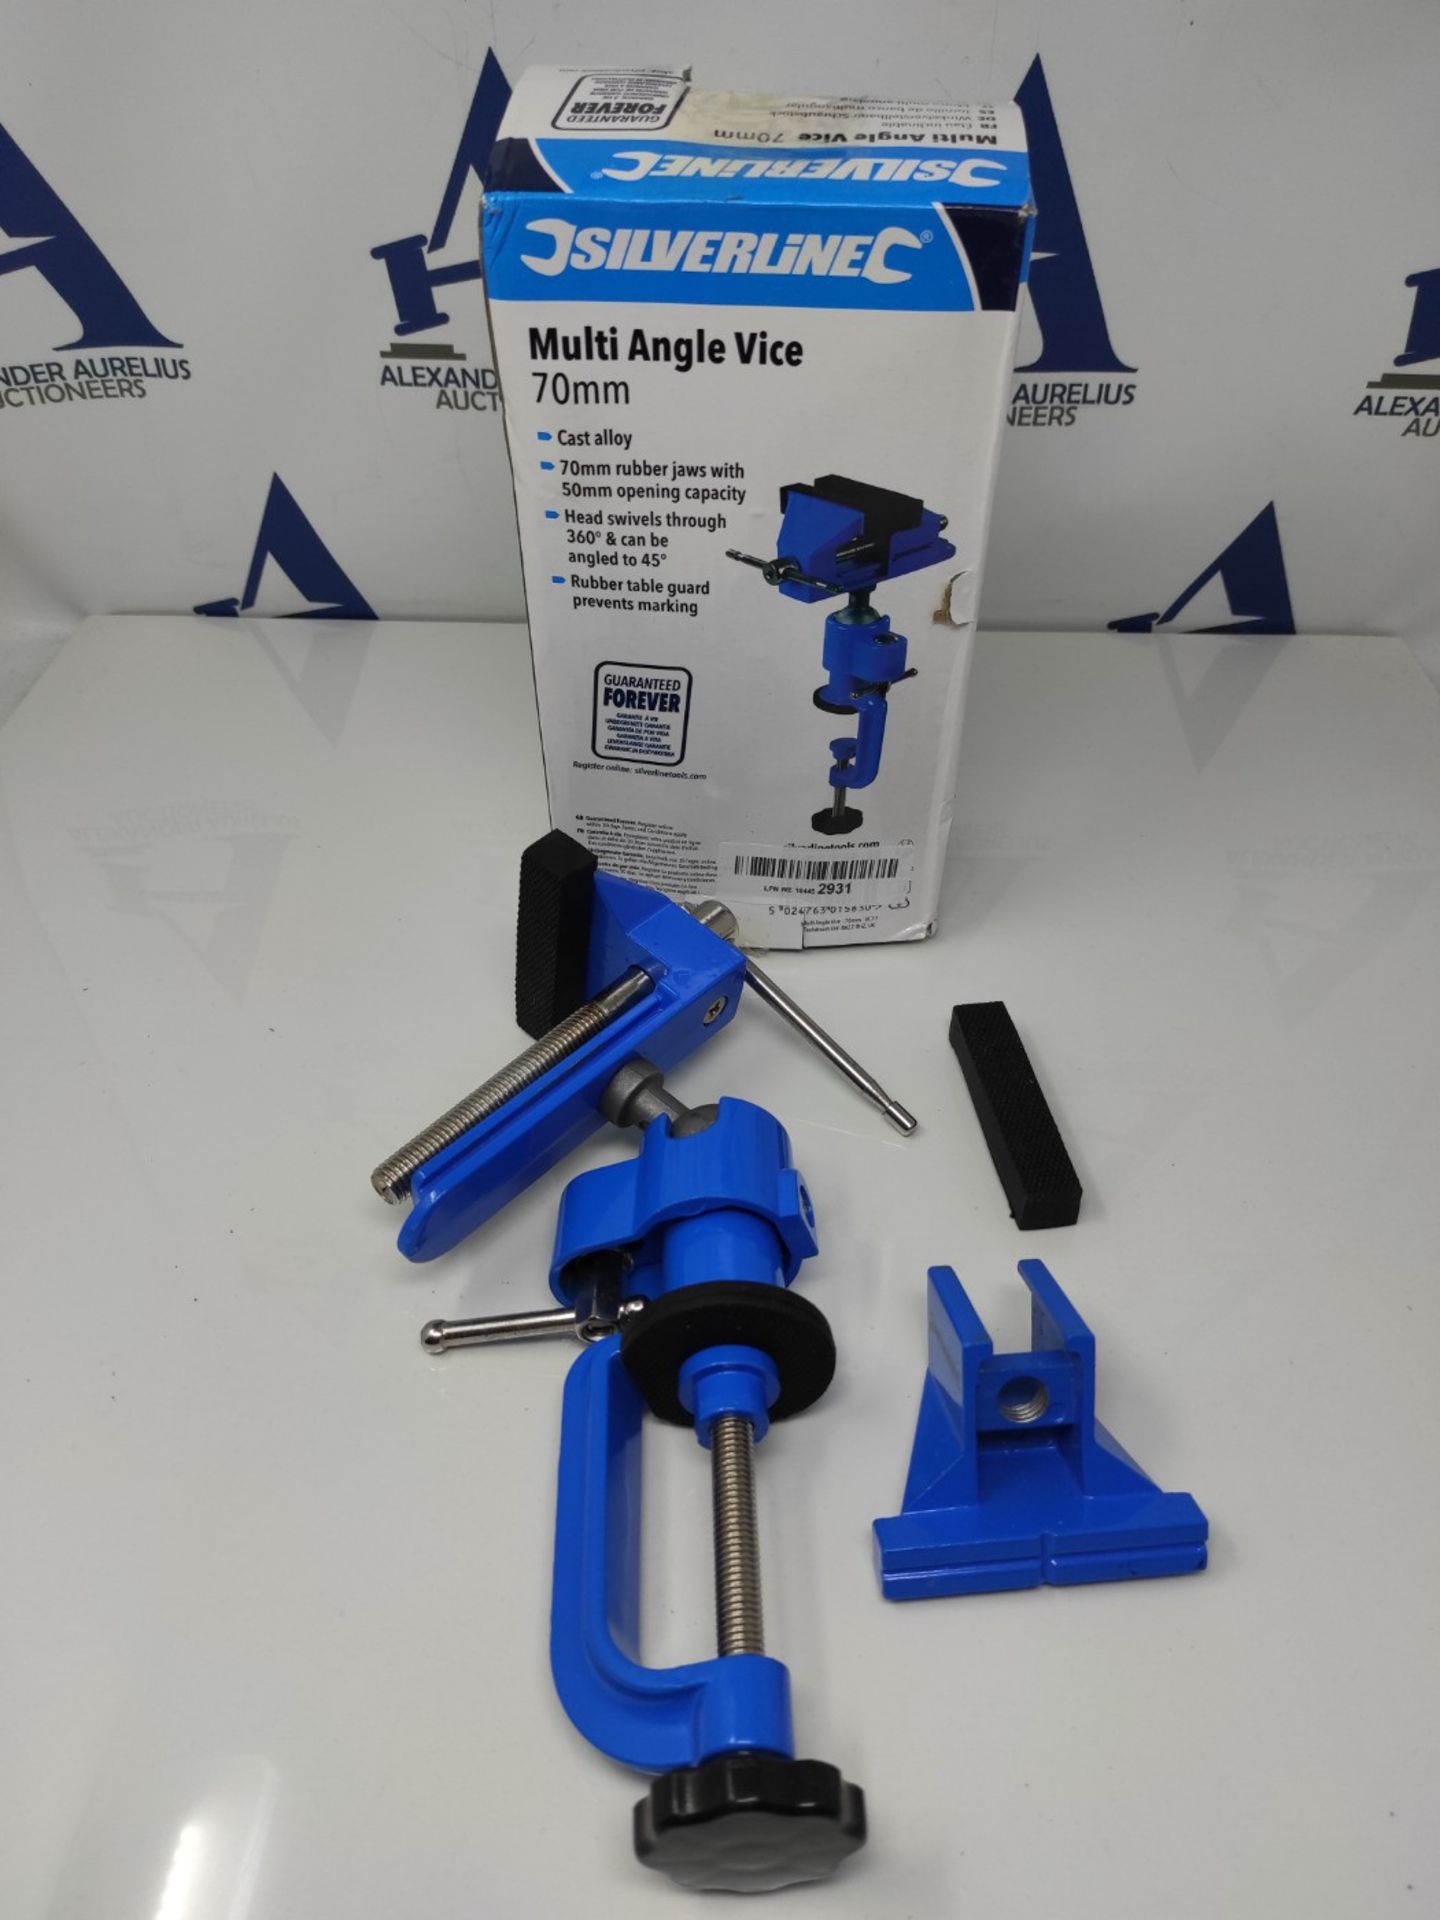 Silverline Multi Angle Vice 70 mm (VC17) - Image 2 of 2